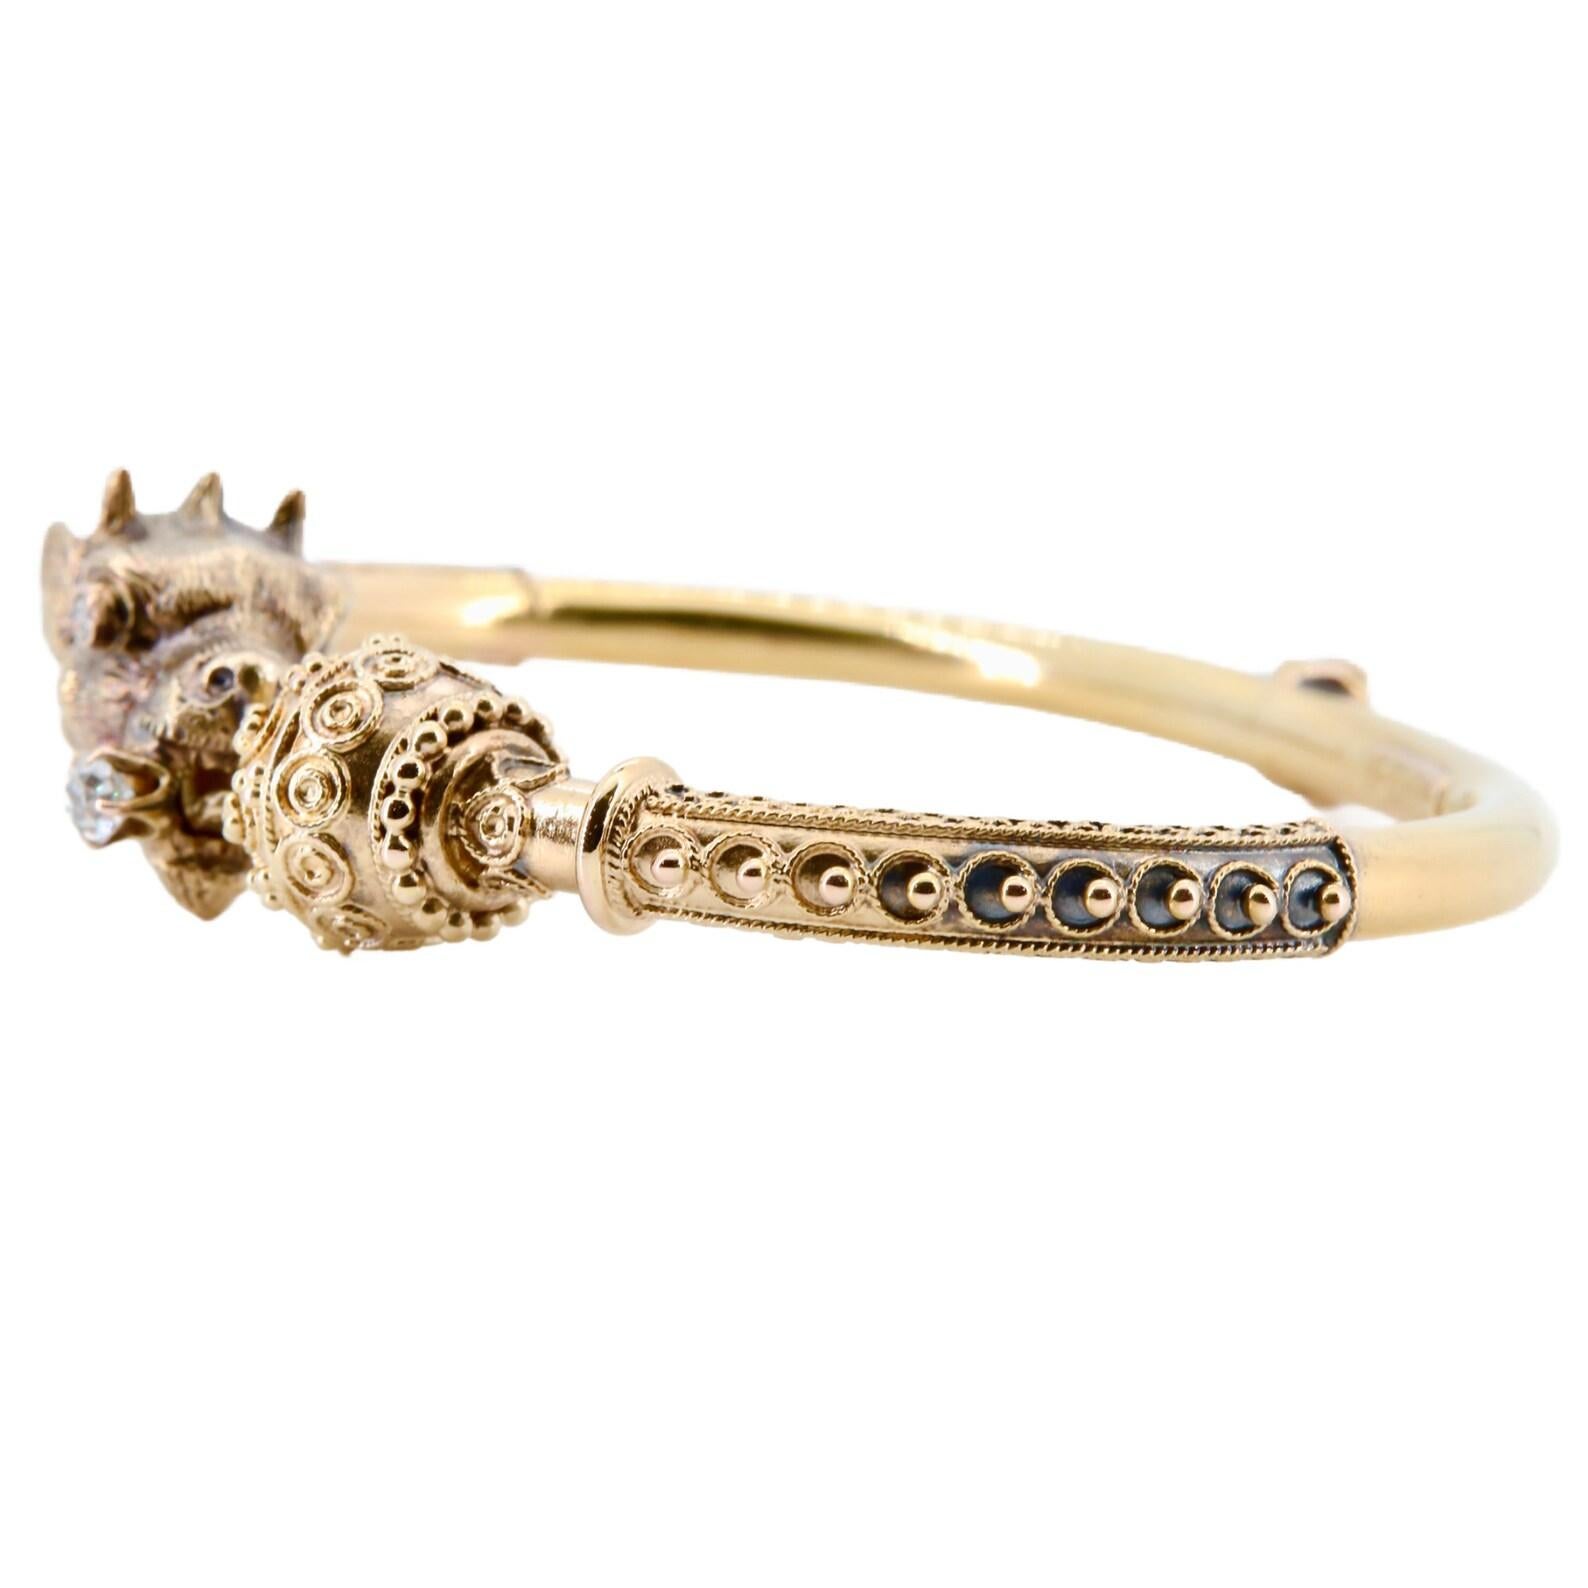 A victorian period Etruscan revival griffin form bracelet in 14 karat yellow gold. Featuring a beautifully sculpted griffin with an old mine cut diamond in it's mouth, and a diamond eye. Accenting the bracelet is fine Cannetille work throughout in a